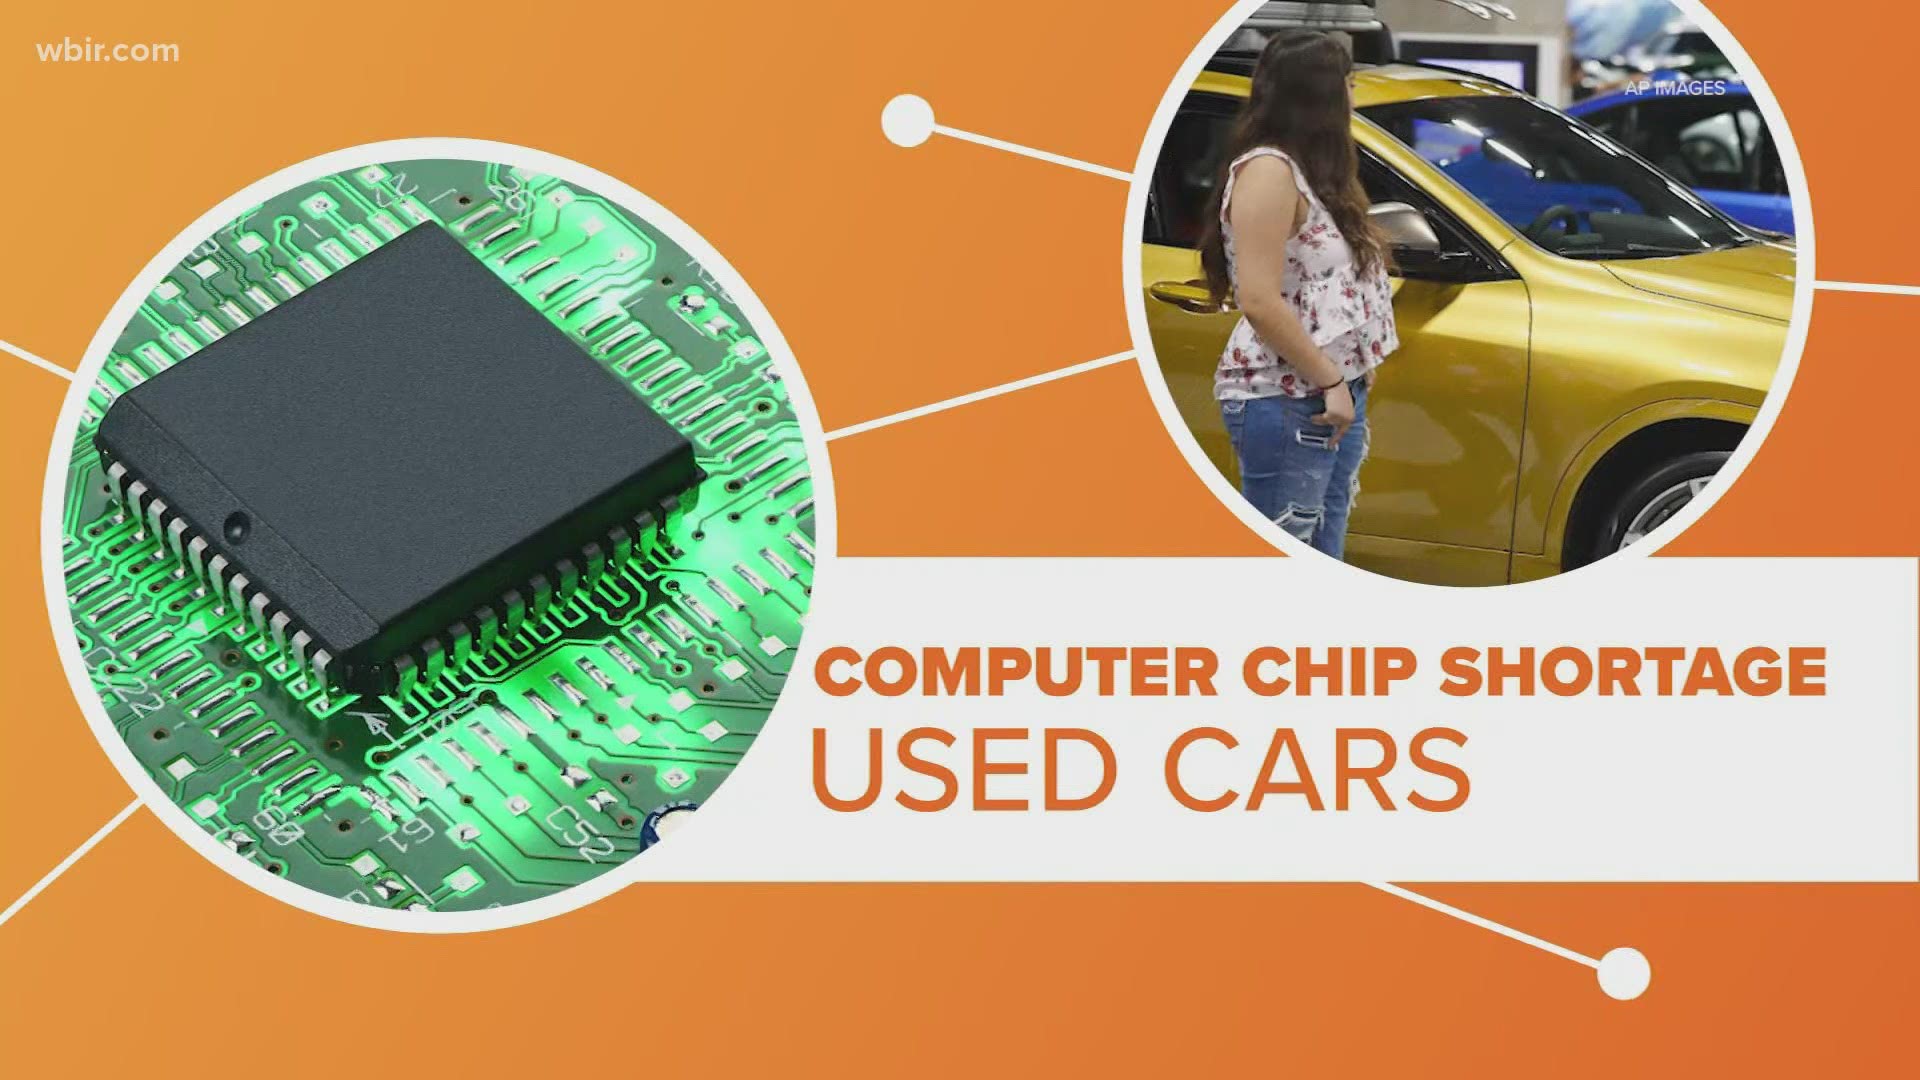 A shortage of computer chips means you could be paying higher prices for used cars. Let's connect the dots.